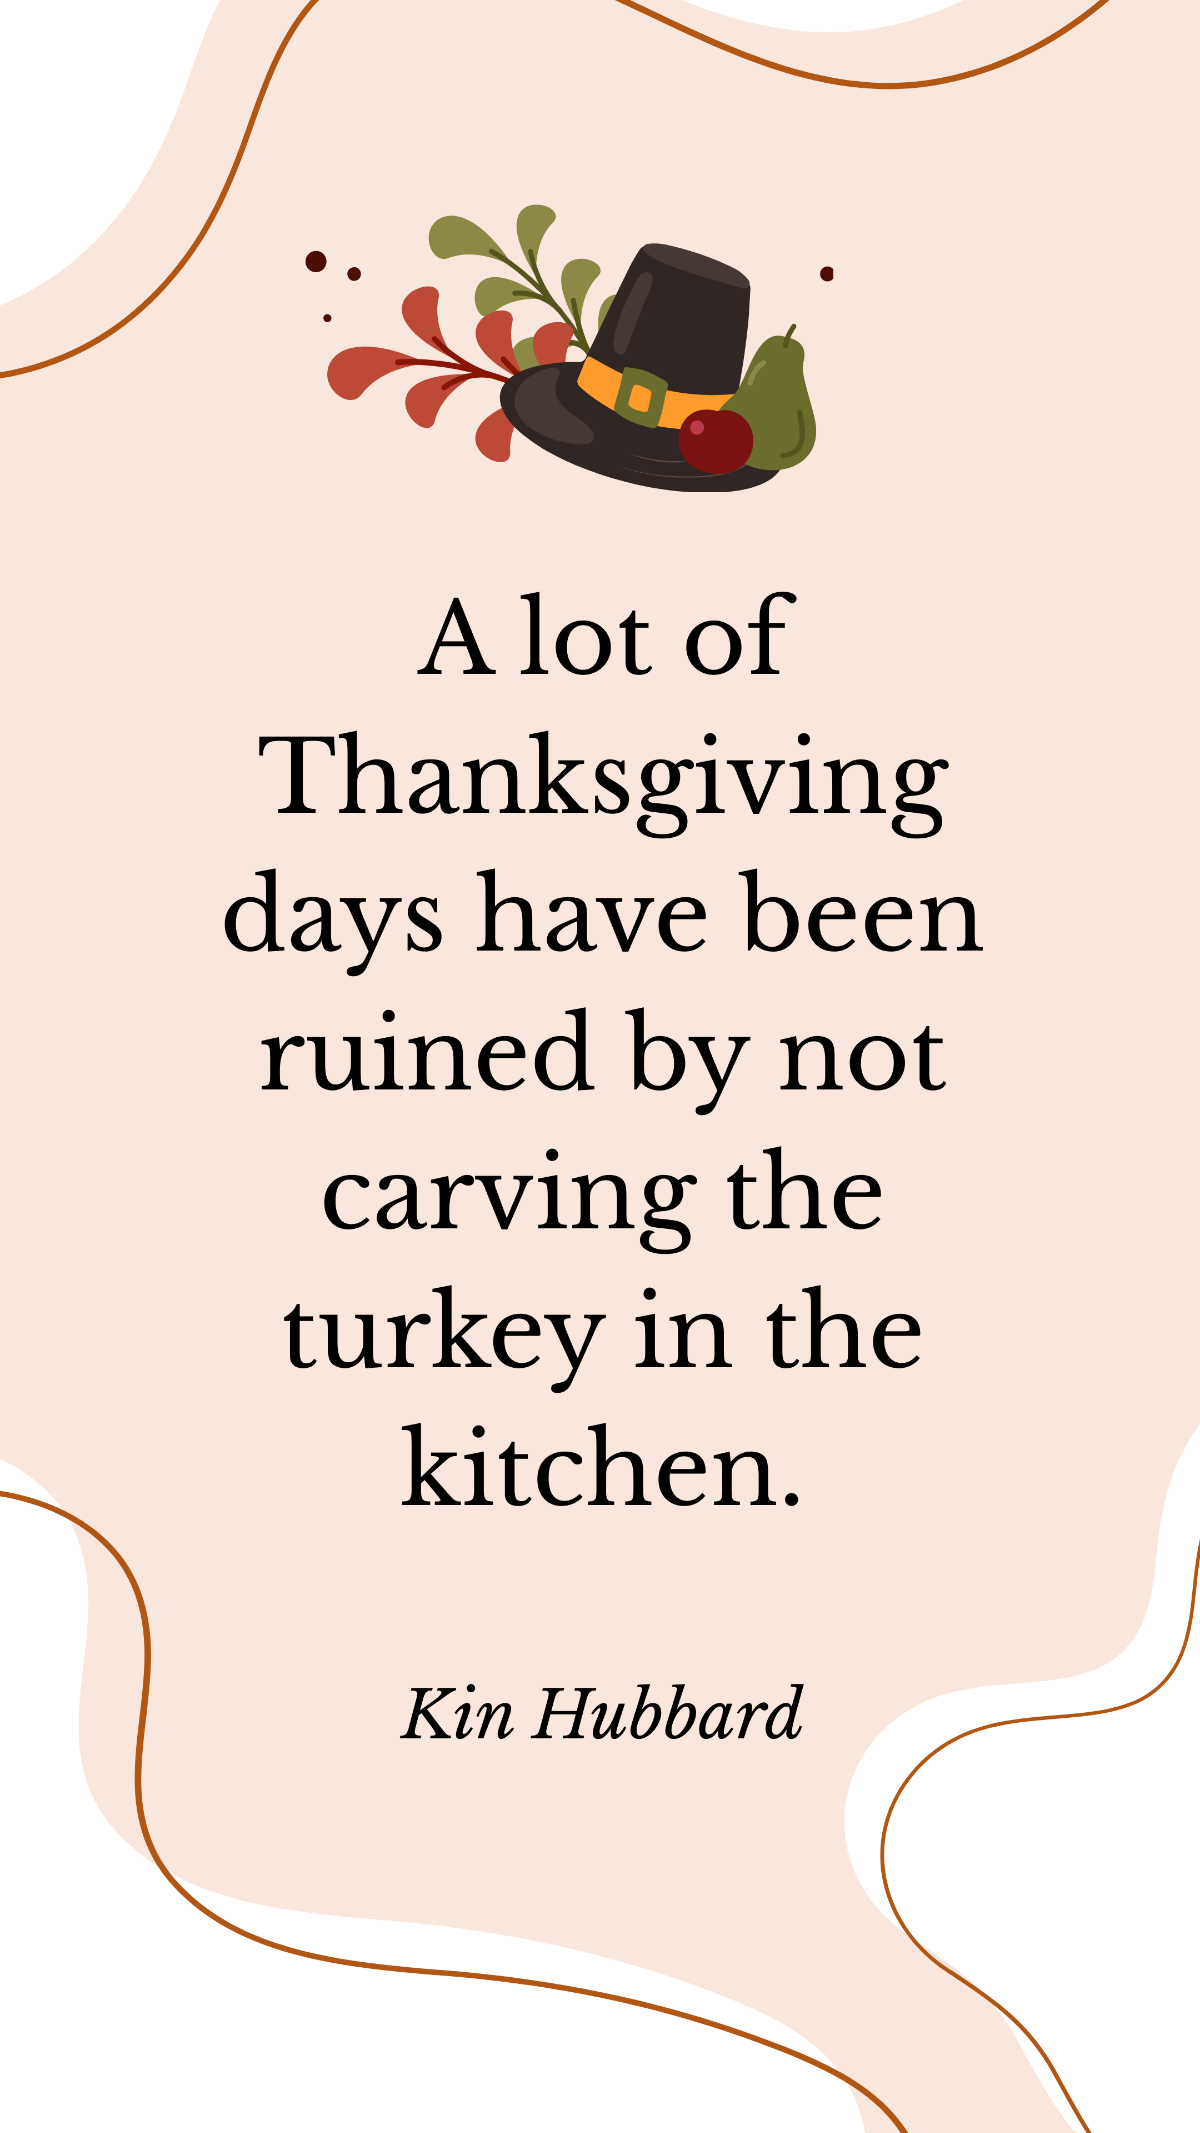 Kin Hubbard - A lot of Thanksgiving days have been ruined by not carving the turkey in the kitchen. Template